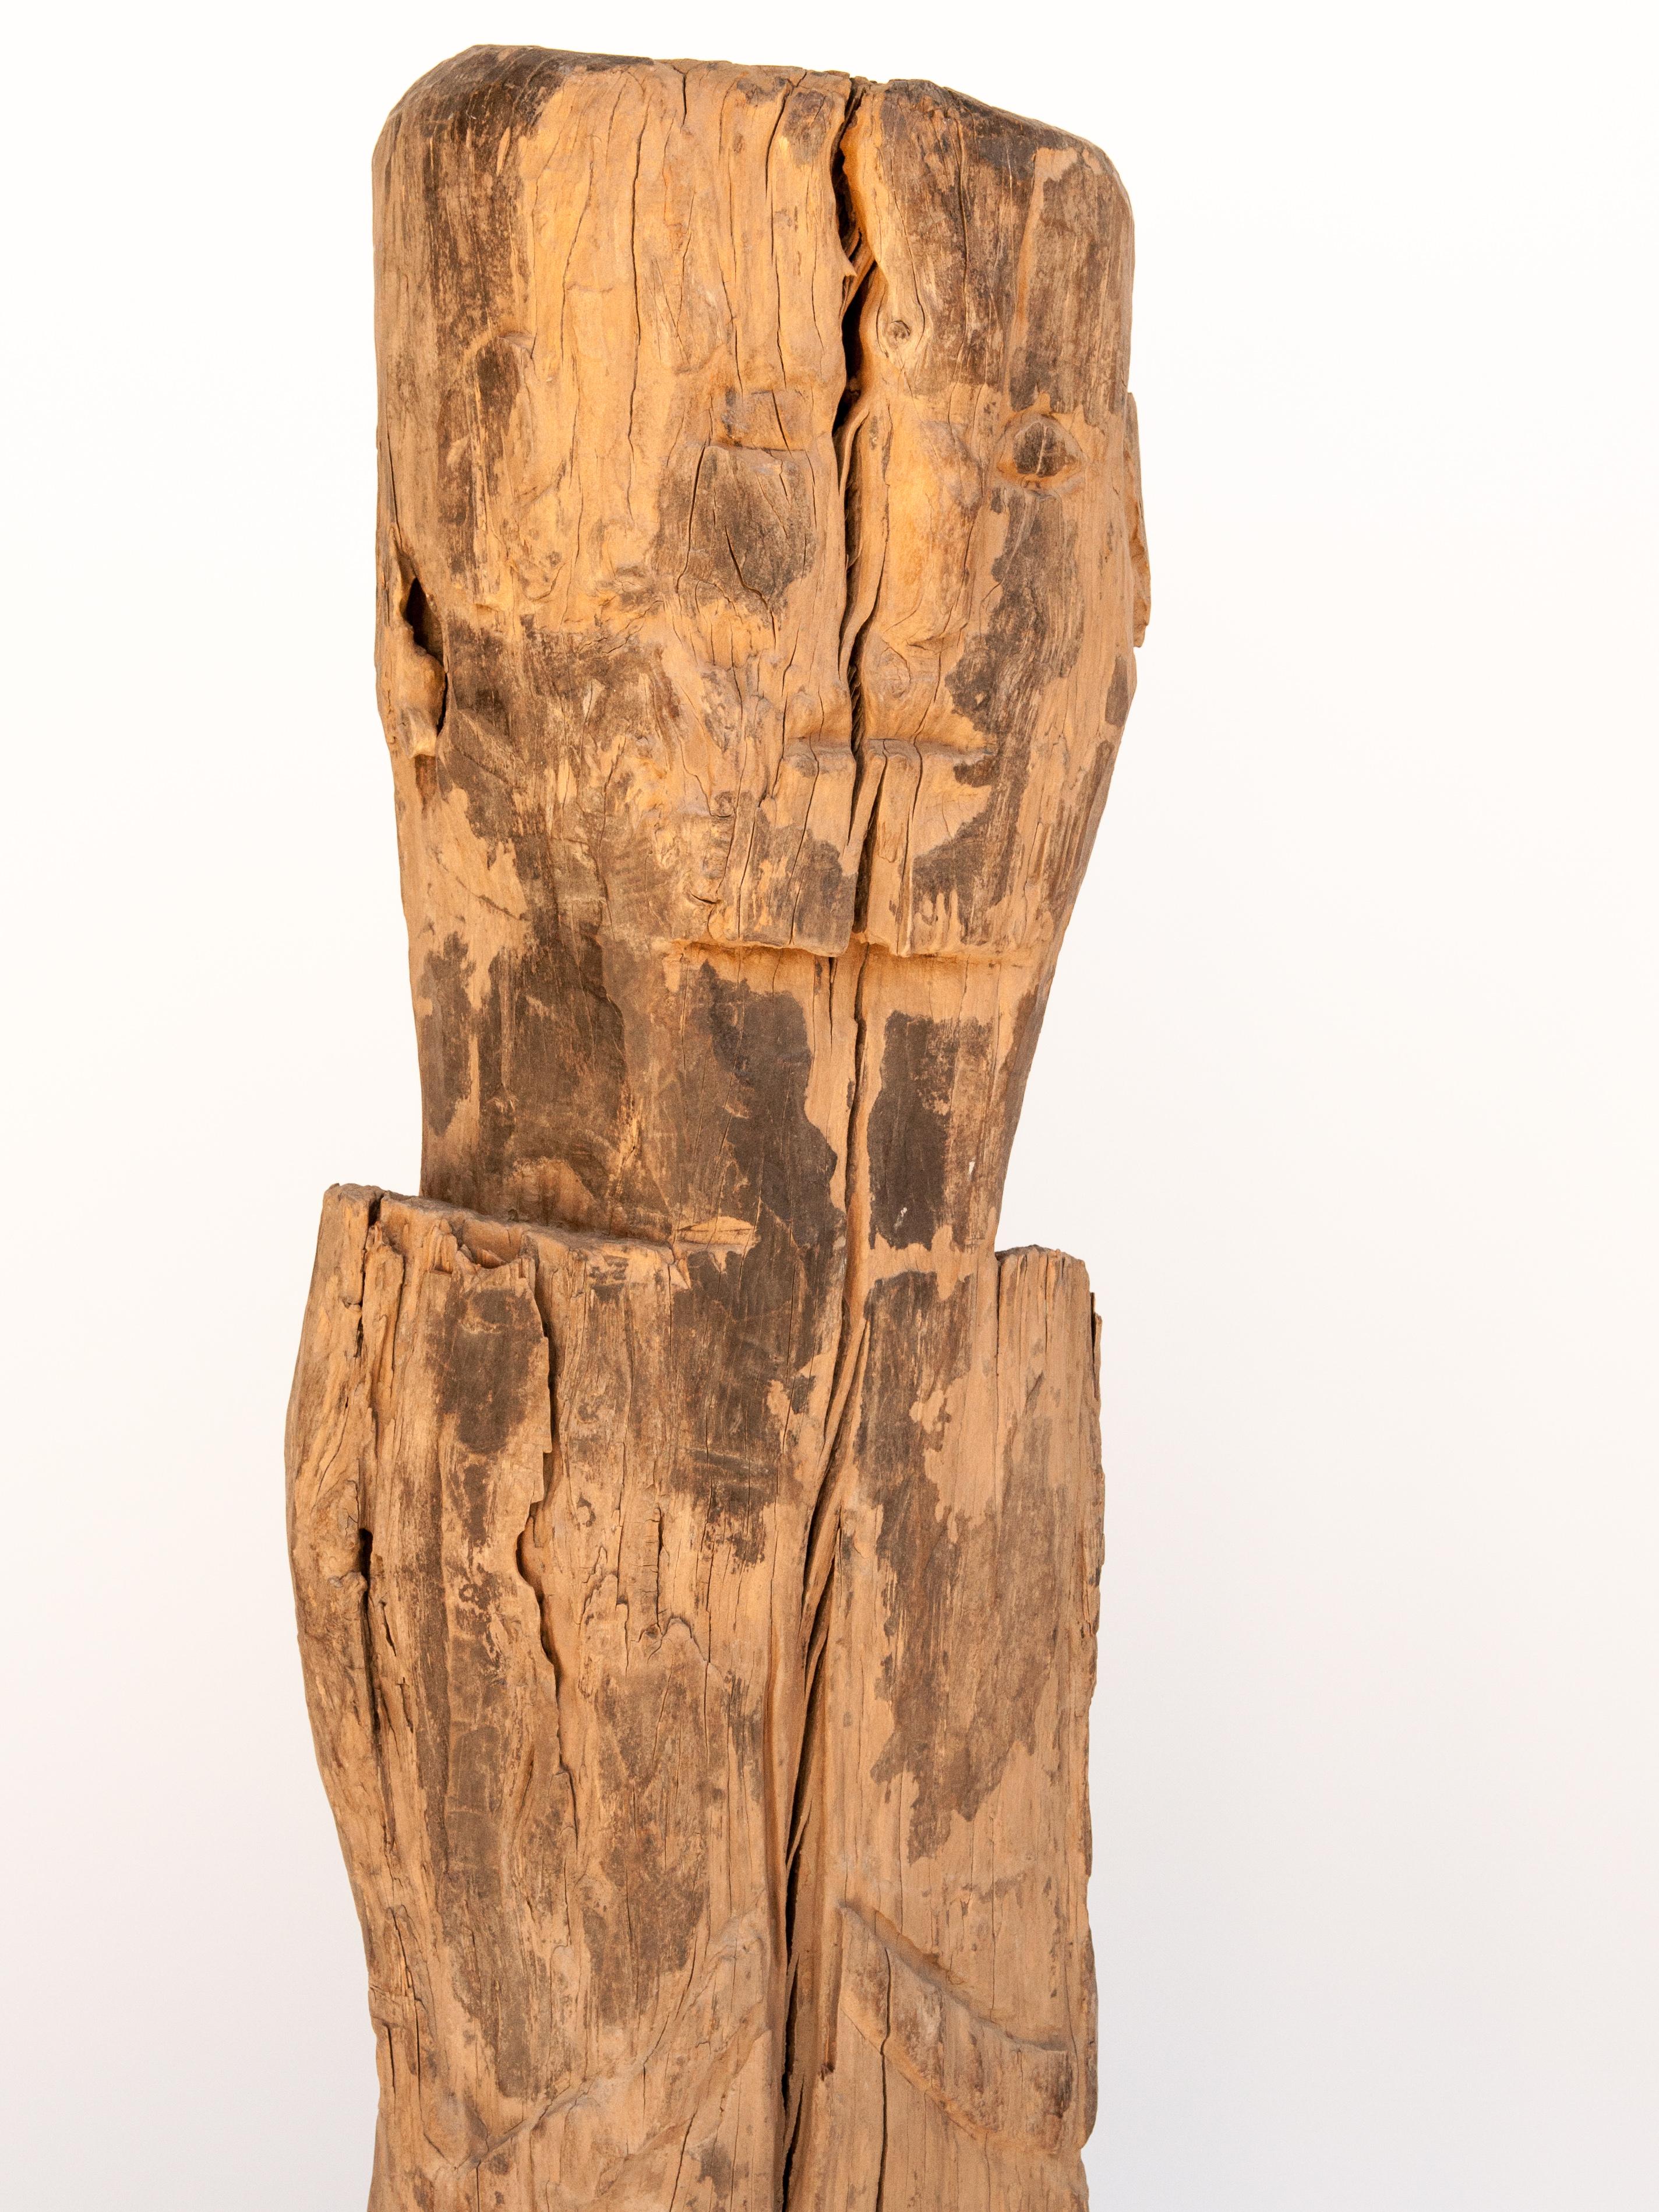 Wooden tribal statue or bridge figure from West Nepal, early to mid-20th century mounted on a metal base.
This wooden figure comes from the West Nepal, and is posed standing with hands together in the traditional Namaste greeting of Nepal. It is